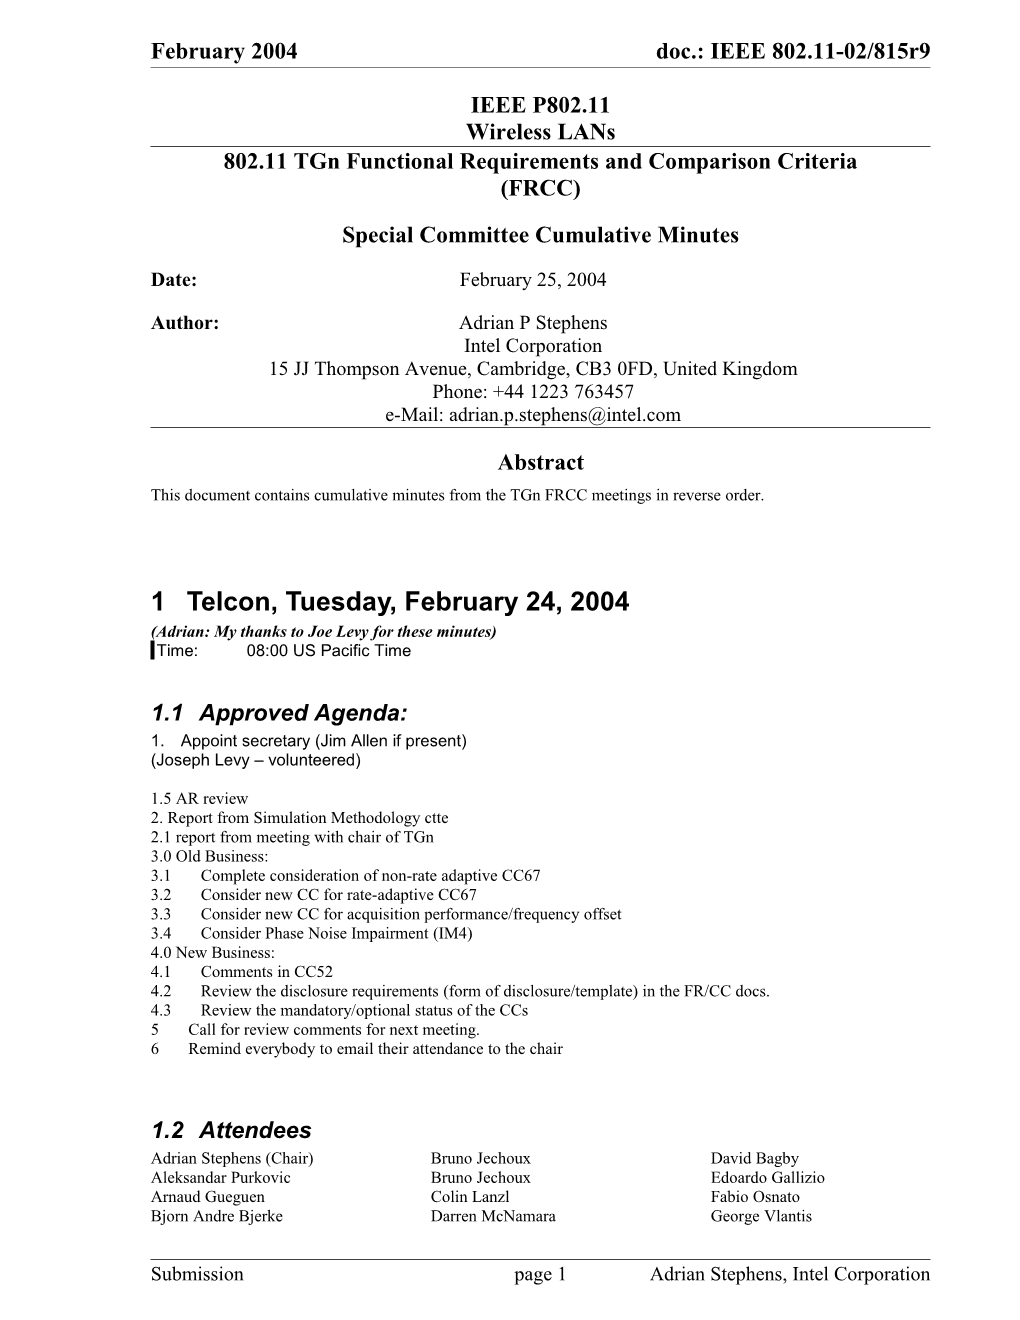 802.11 Tgn Functional Requirements and Comparison Criteria (FRCC)